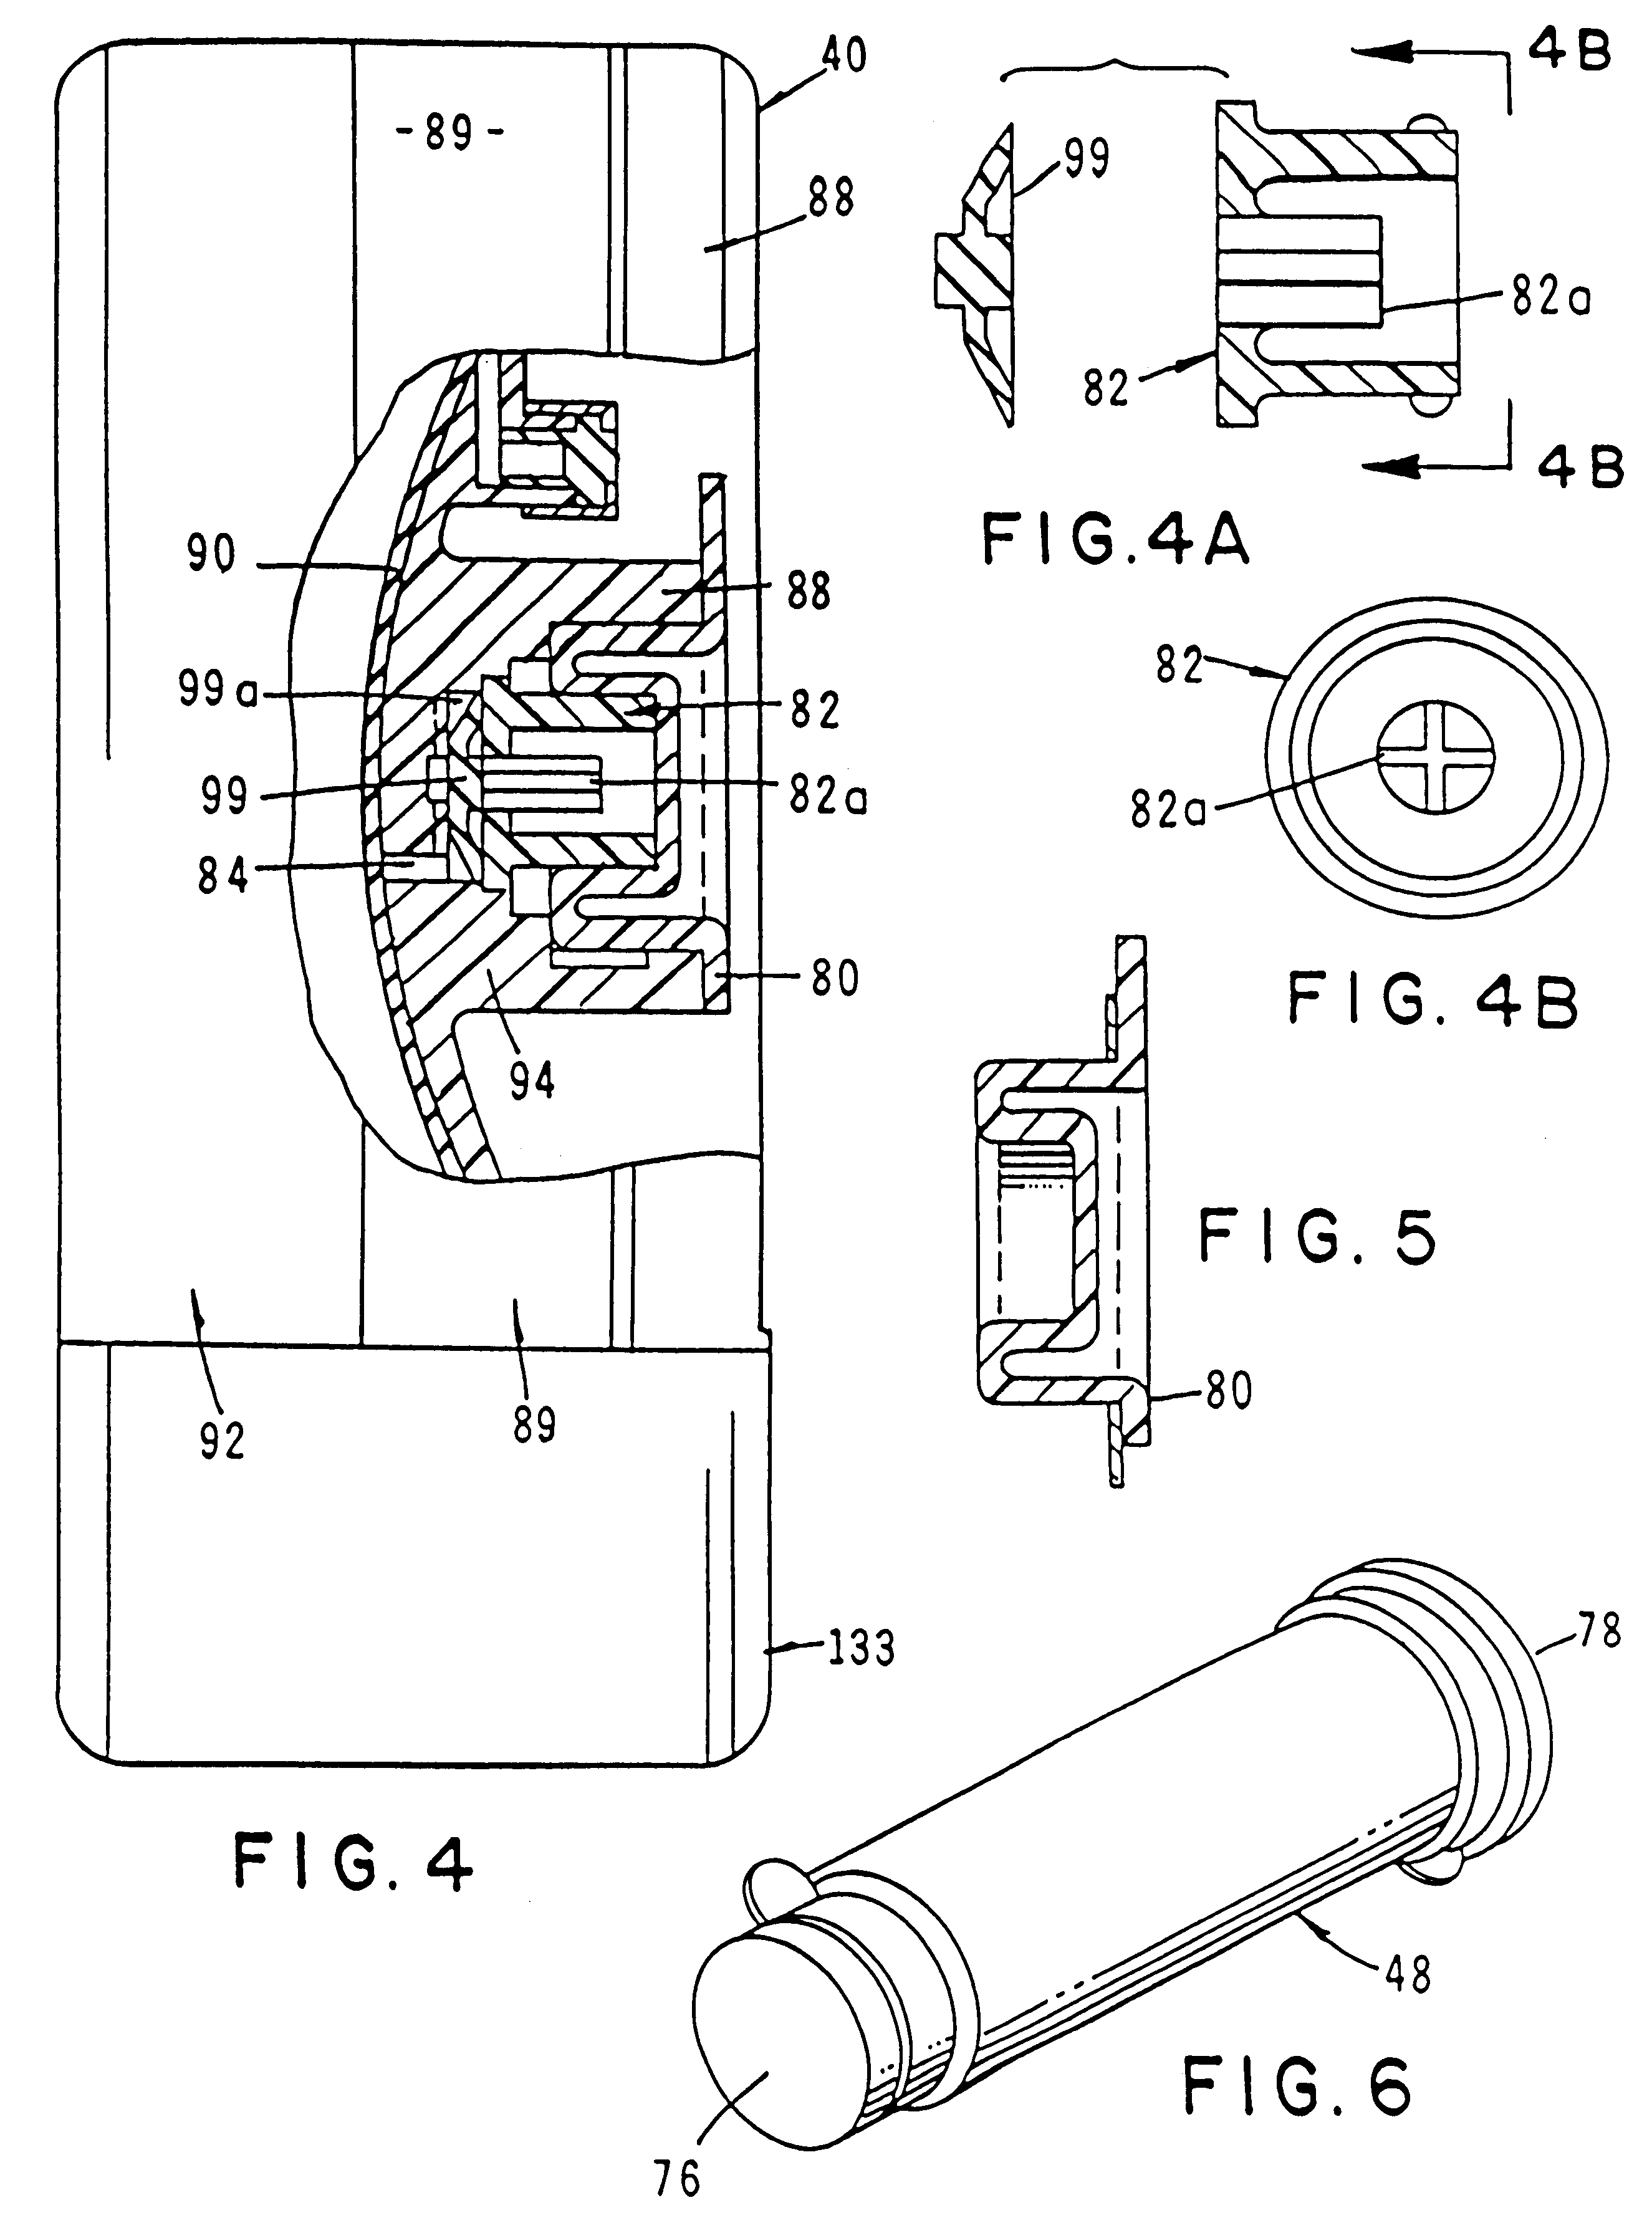 Fluid delivery apparatus with reservoir fill assembly